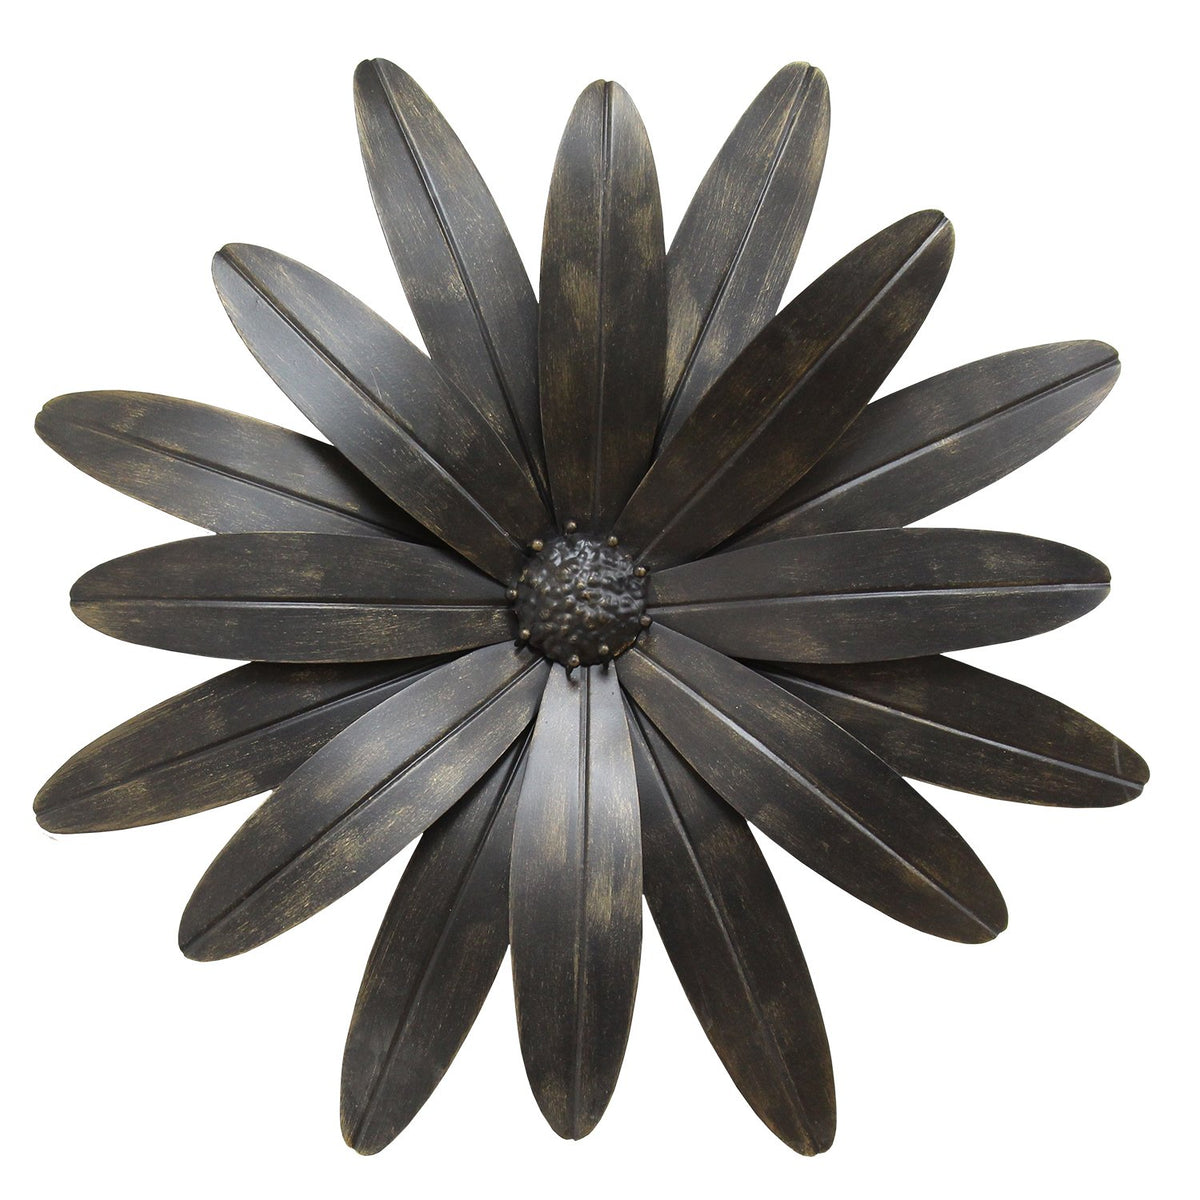 Stratton Home Decor S07703 Enchanting Over The Door Wall Decor, 38.00 W x 0.75 D x 9.00 H, Black - 3